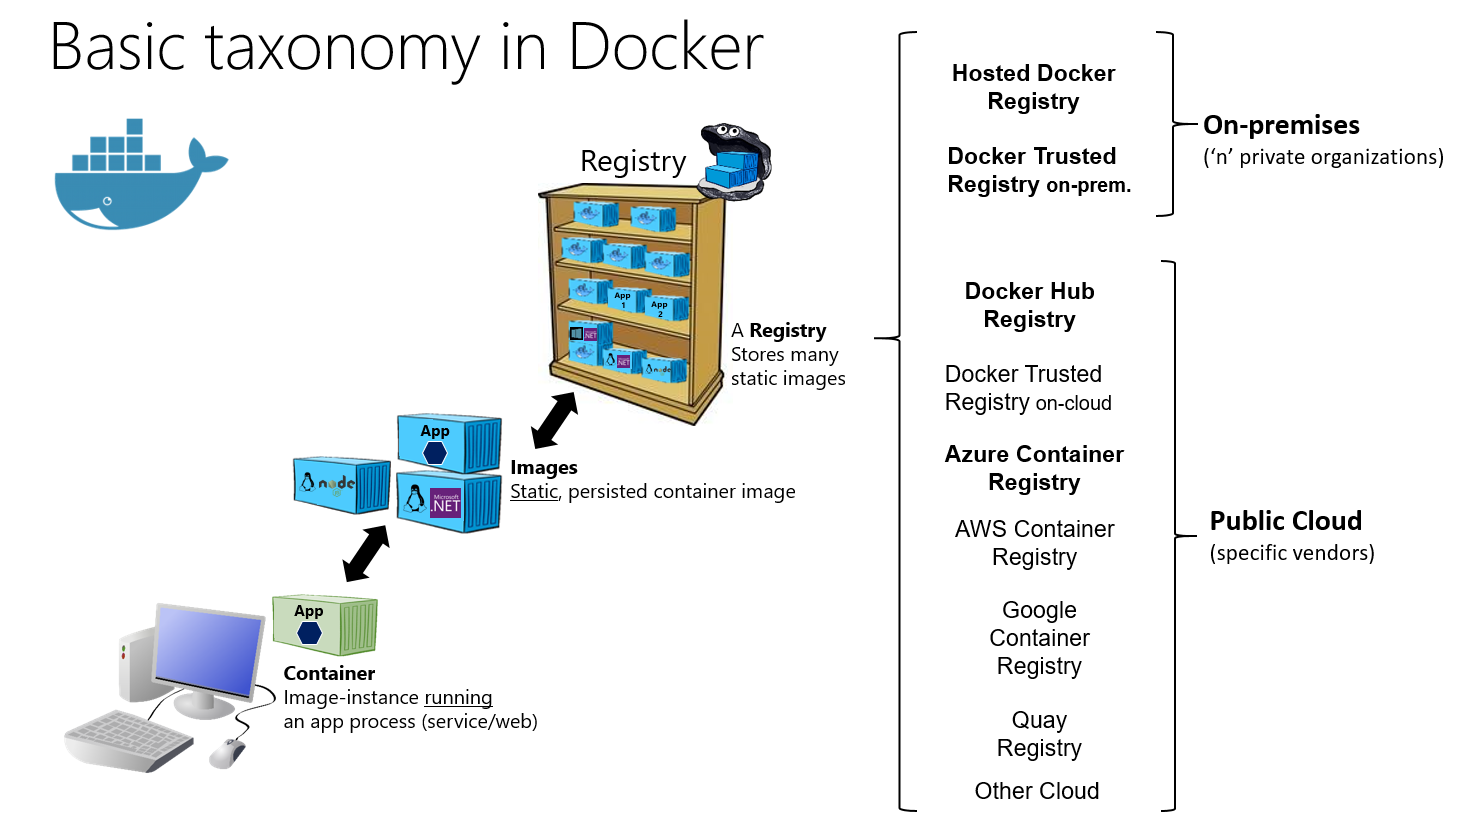 A diagram showing the basic taxonomy in Docker.